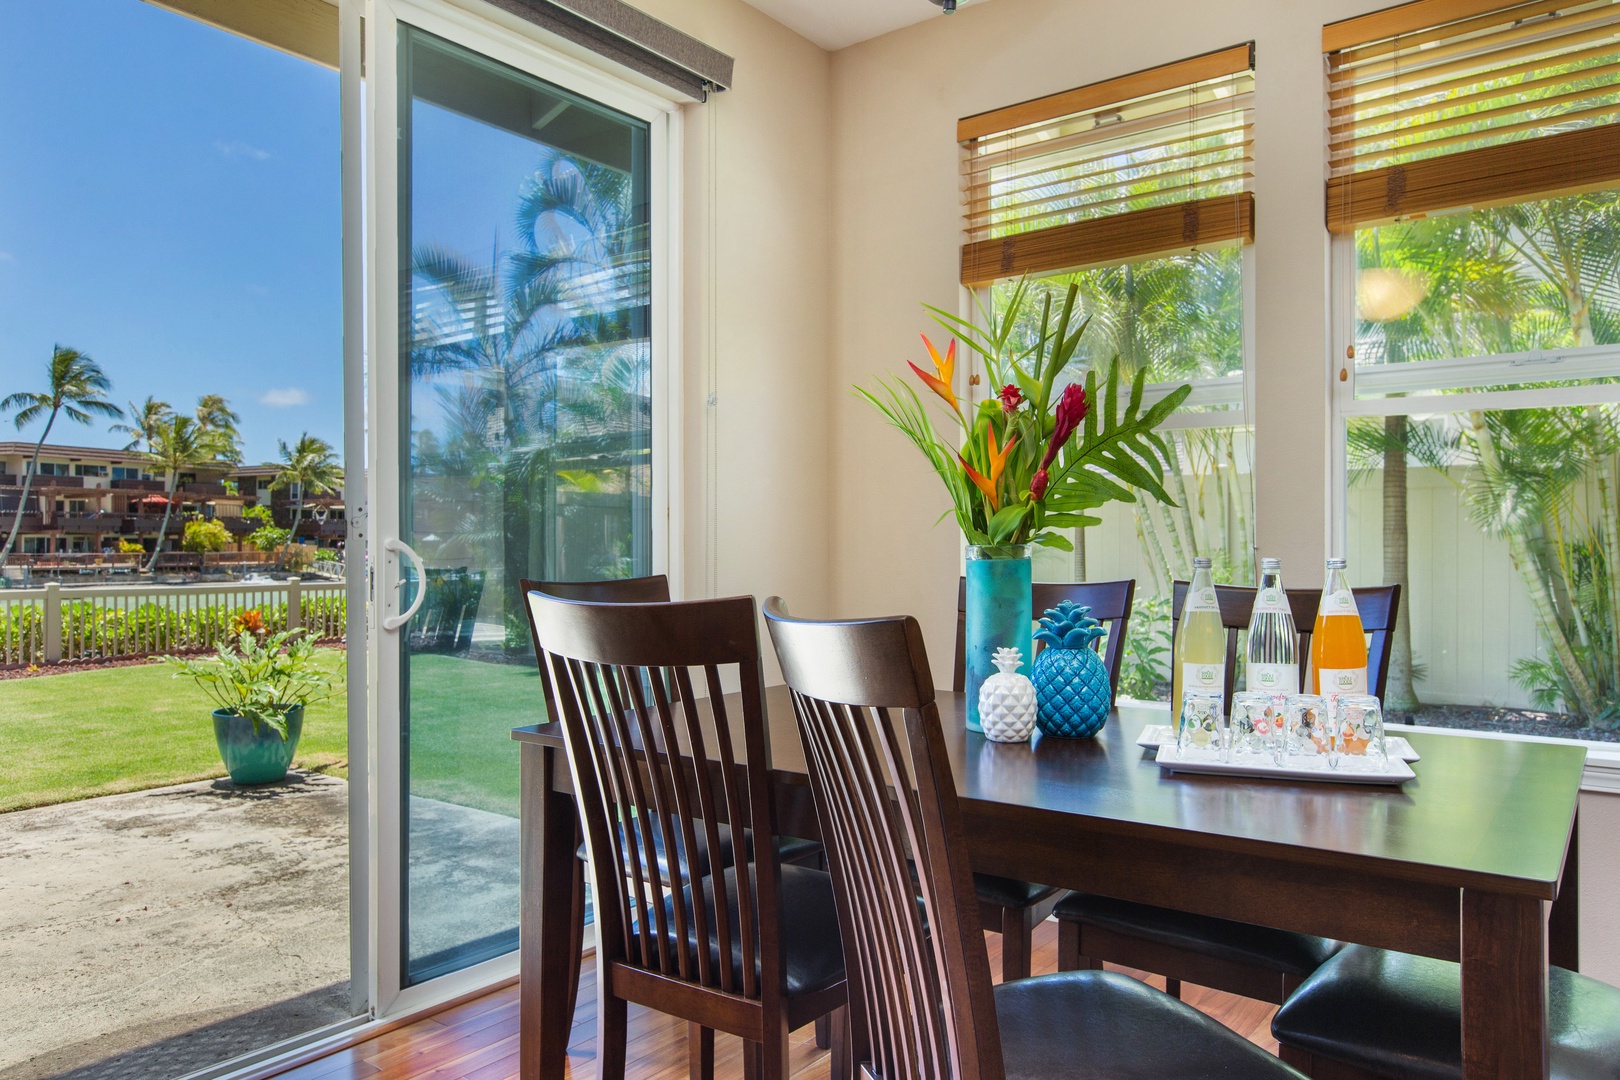 Honolulu Vacation Rentals, Ohana Kai - Gaze across the expansive dining area, seamlessly connecting to the kitchen and inviting living space.